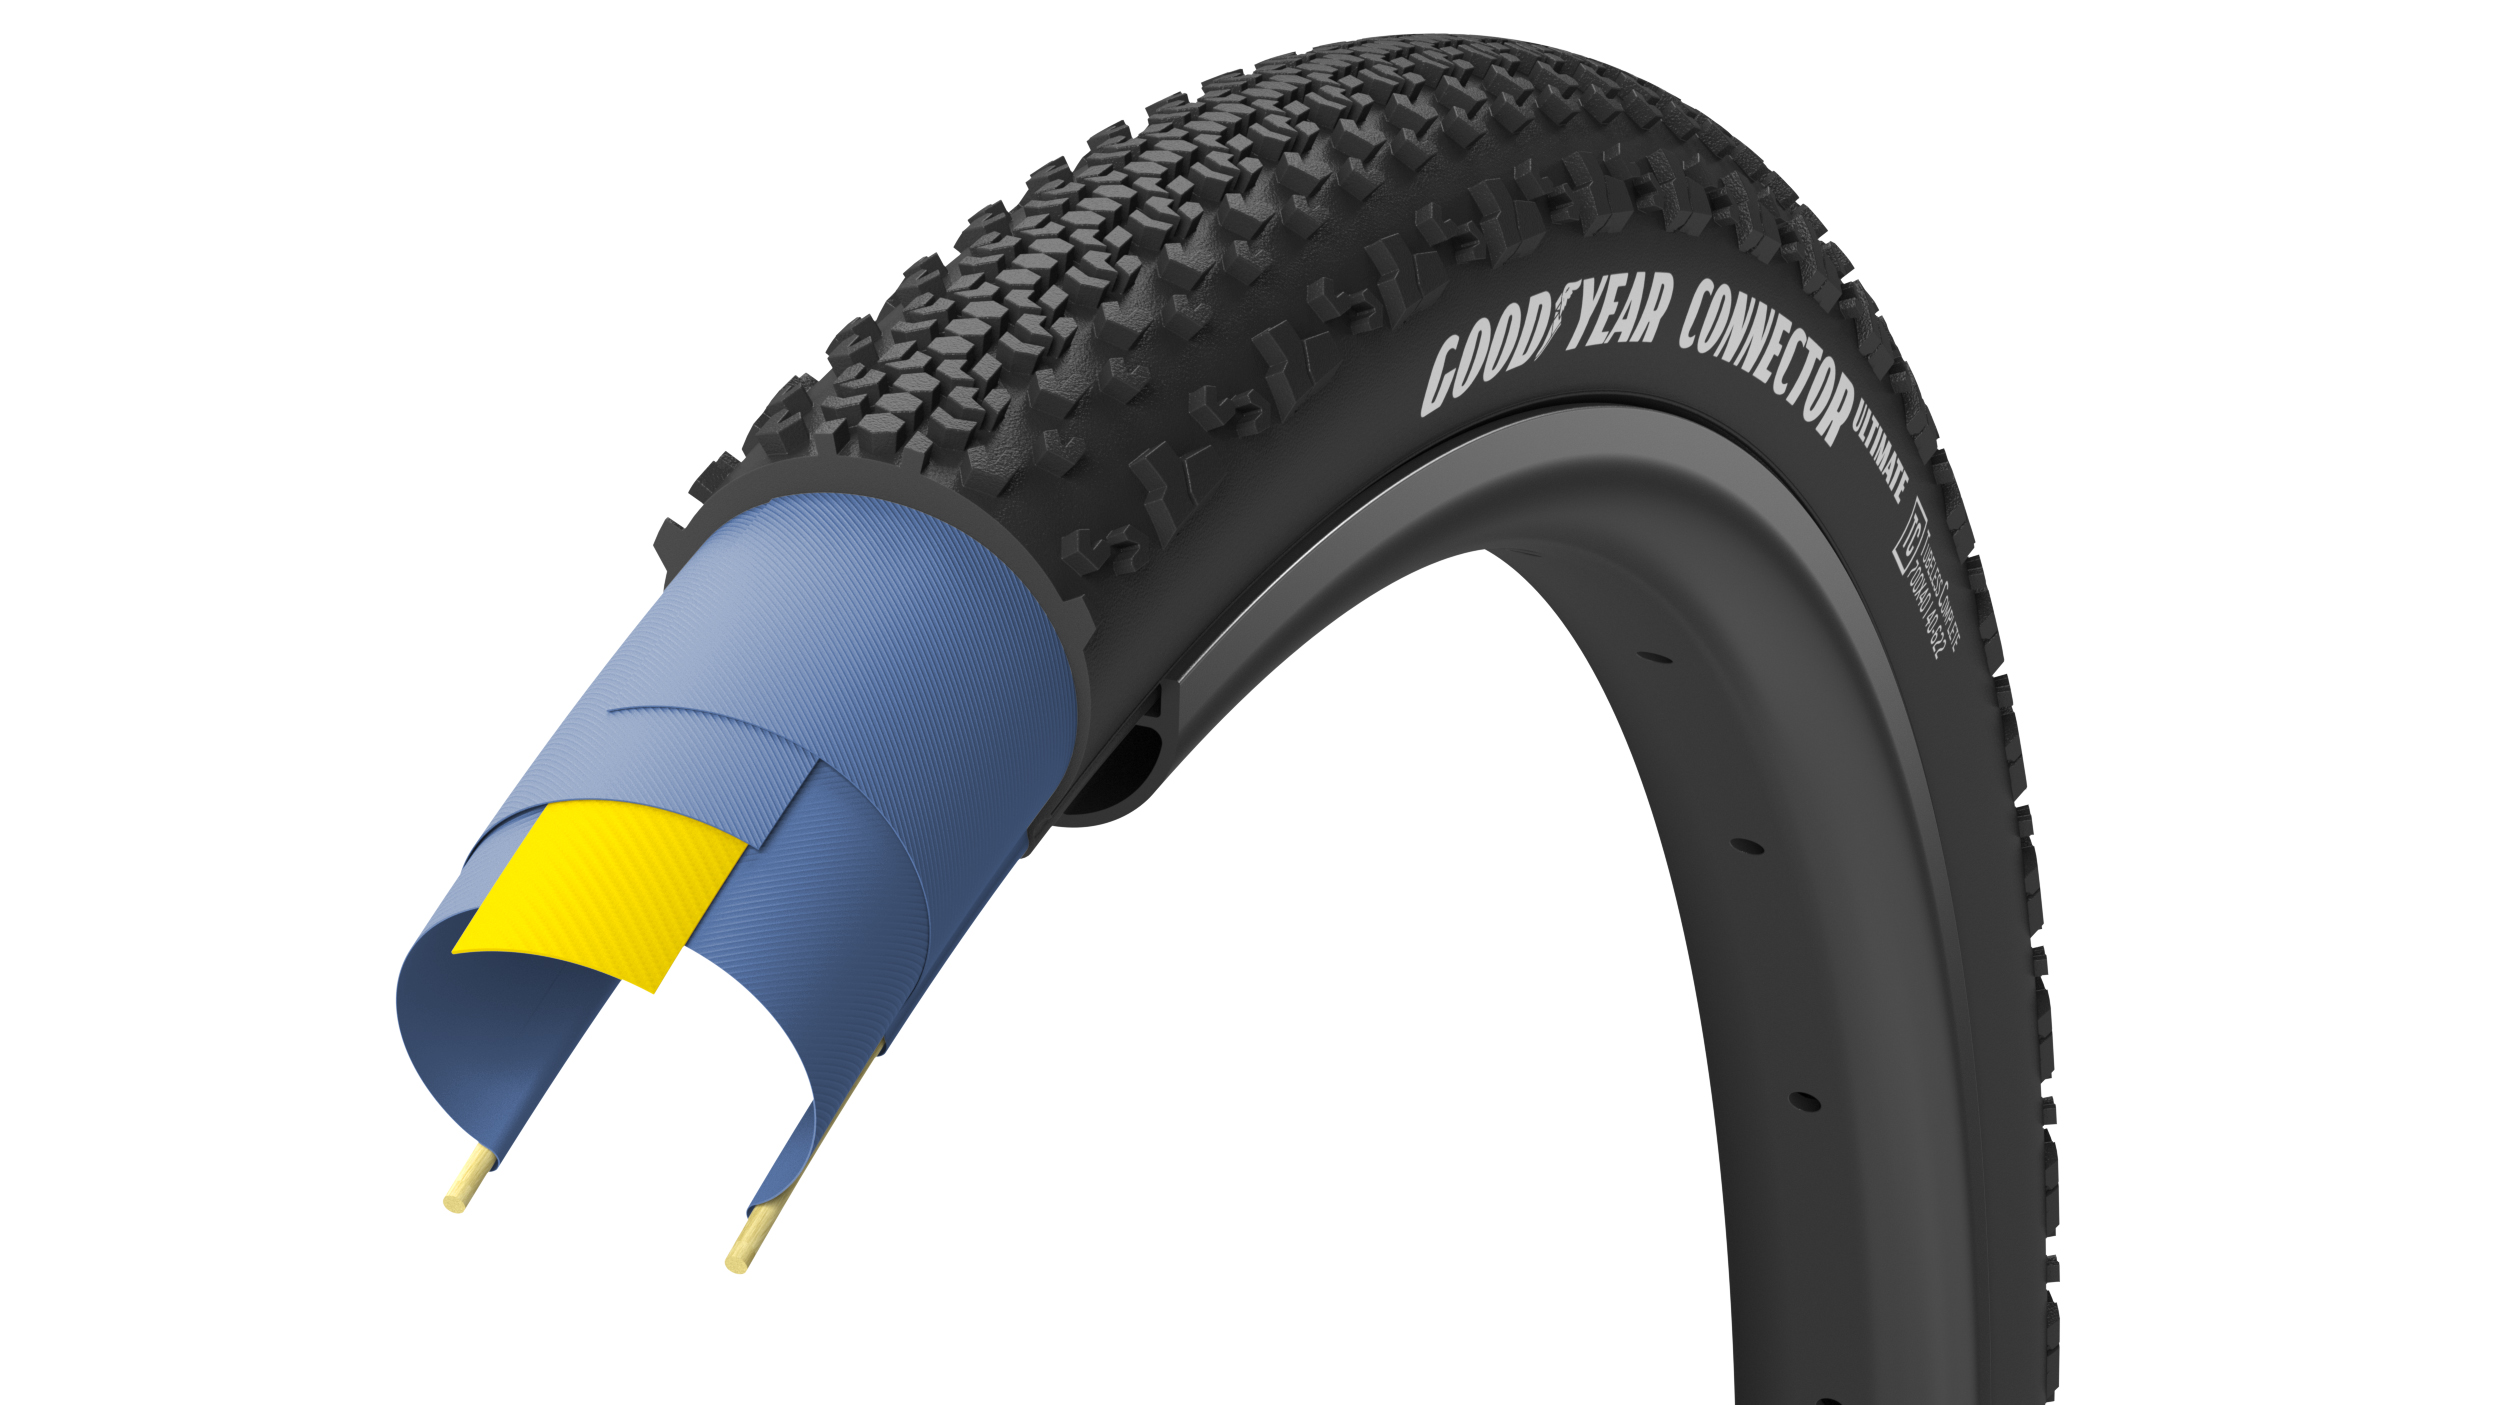 Покрышка 700x35 (35-622) GoodYear CONNECTOR tubeless complete, folding, black, 120tpi фото 